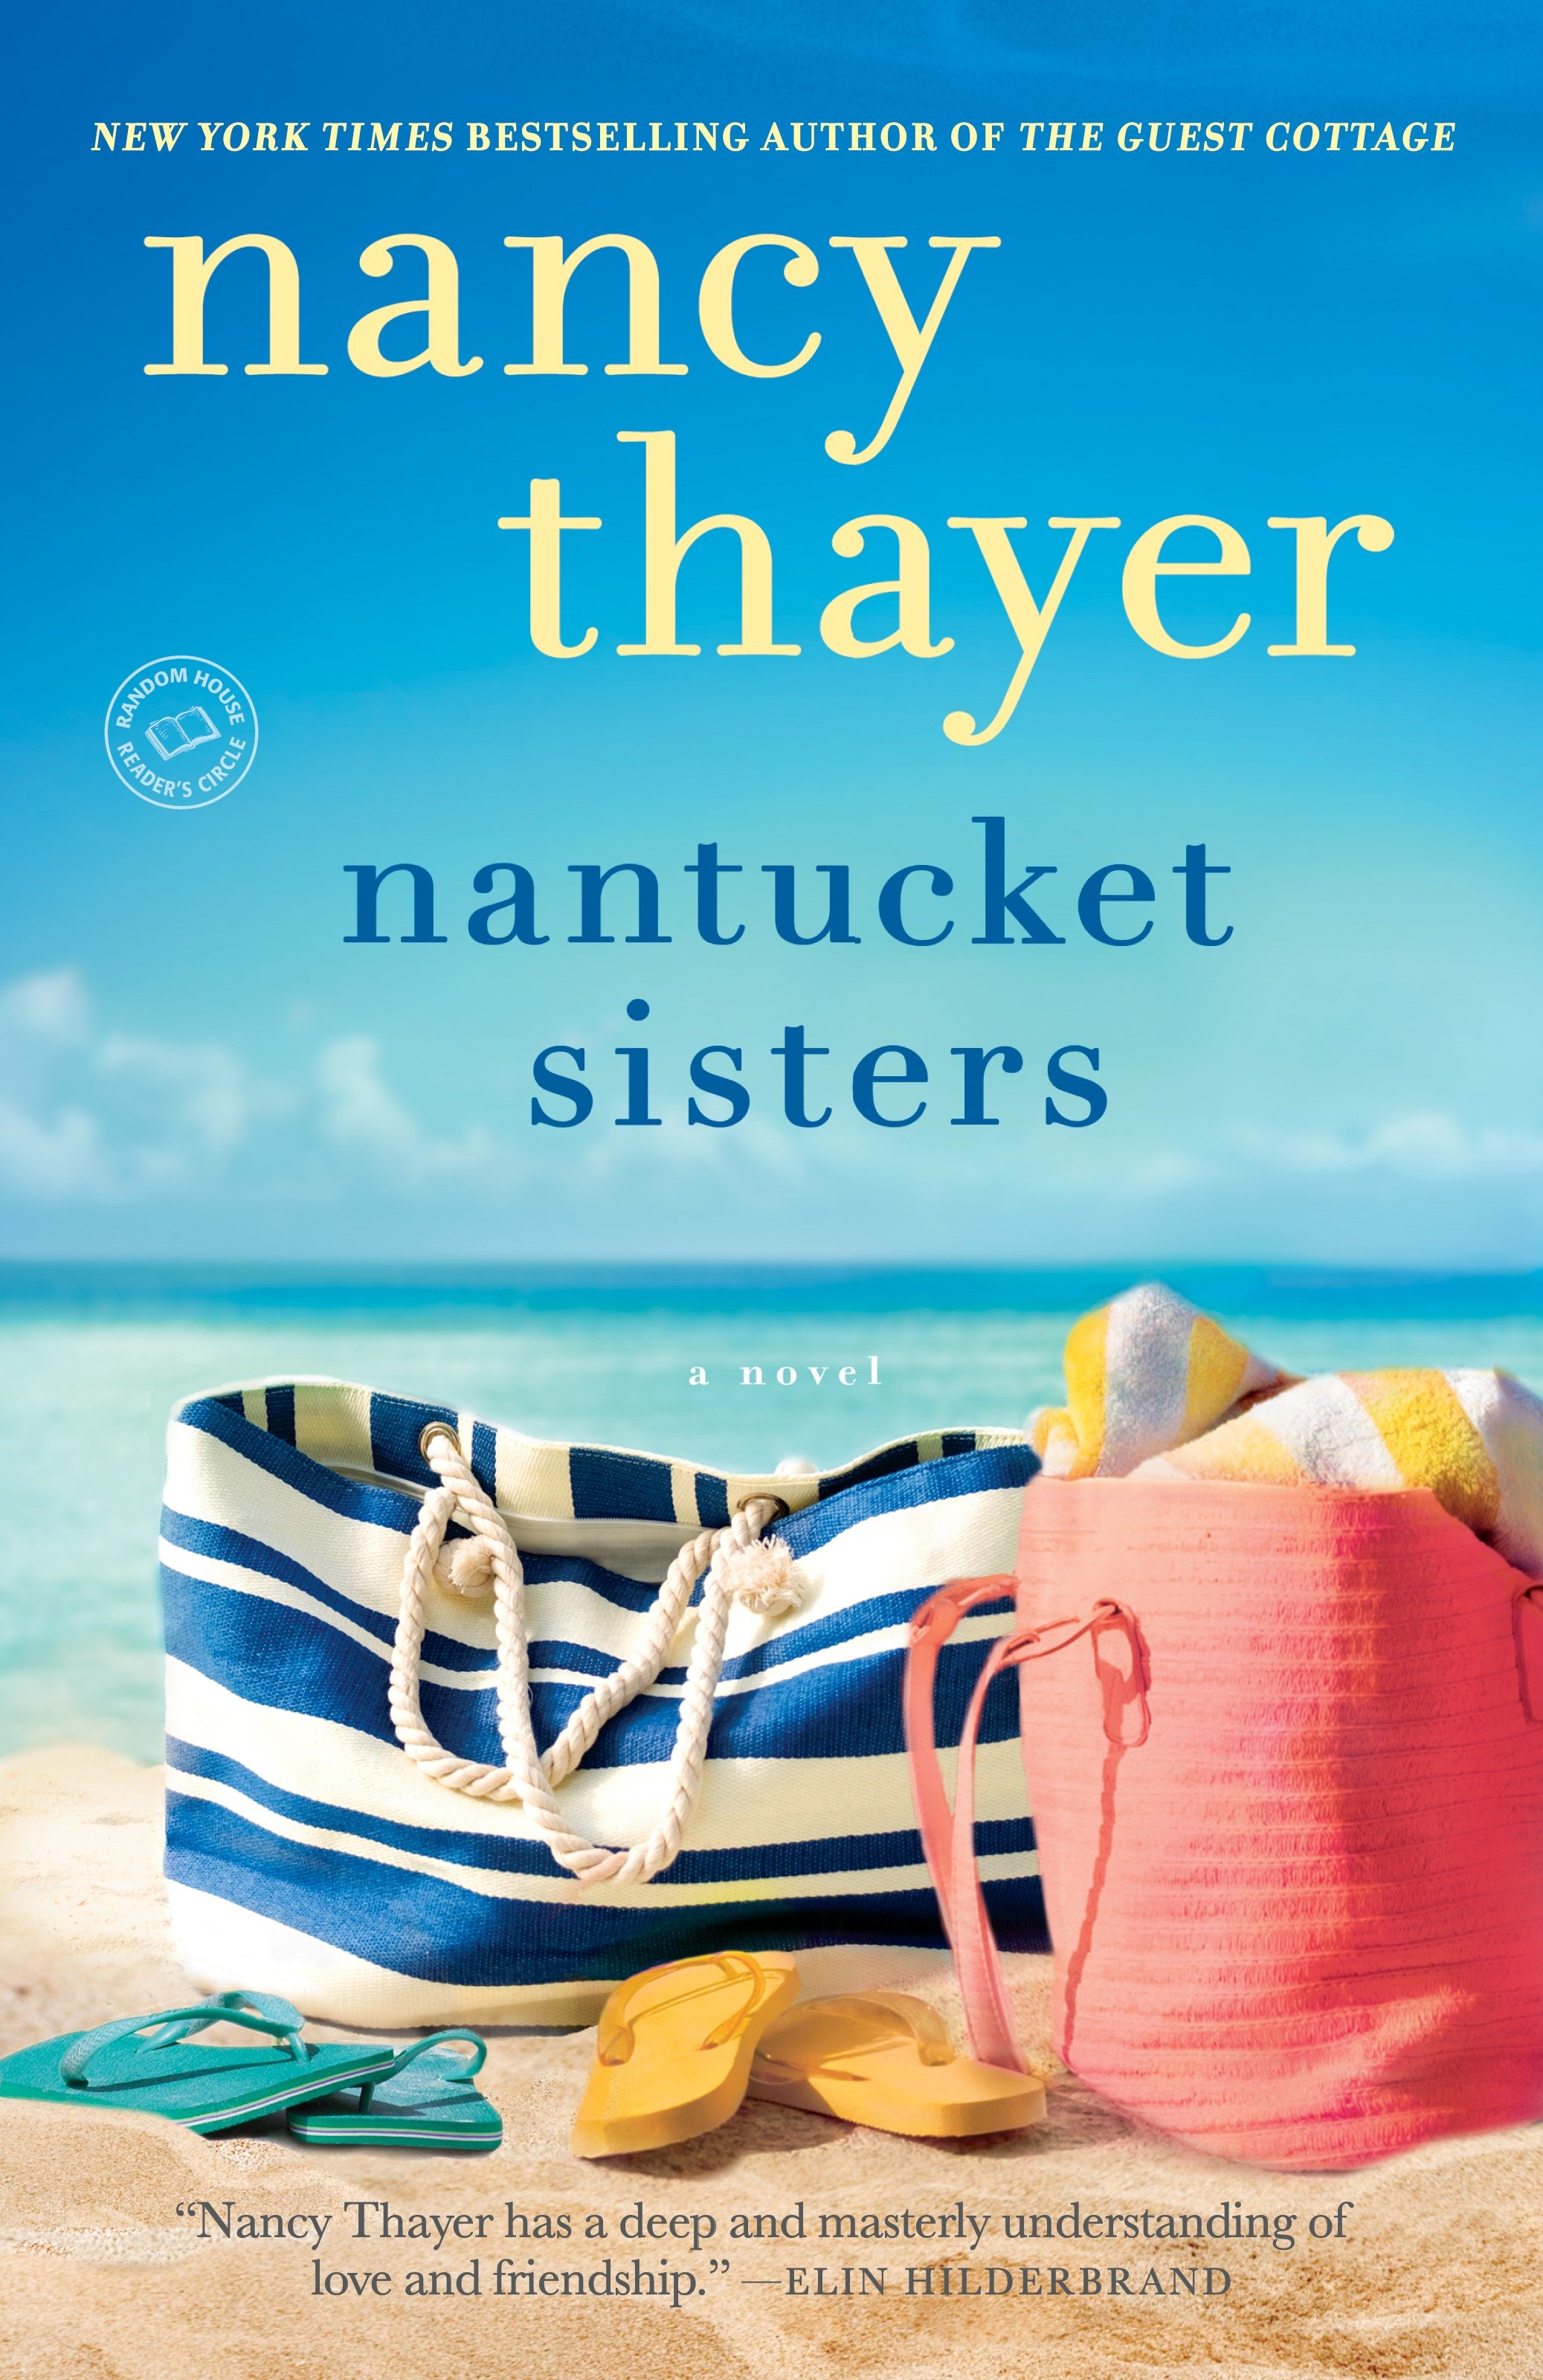 Nantucket sisters cover image